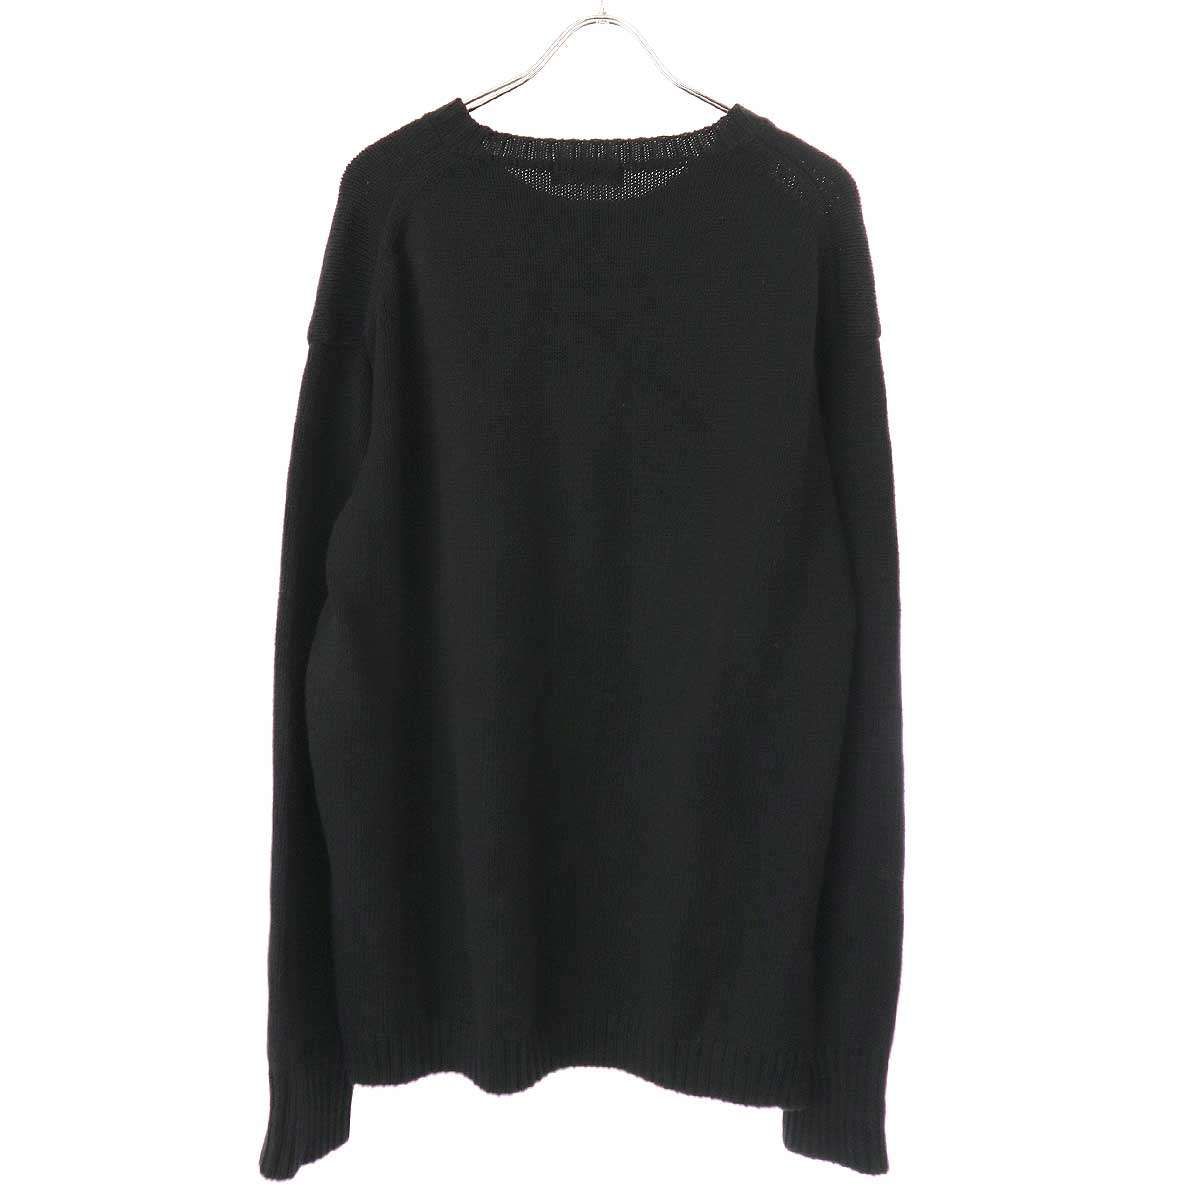 16AW yohji yamamoto RIE KNIT SWEATER 3 | camillevieraservices.com